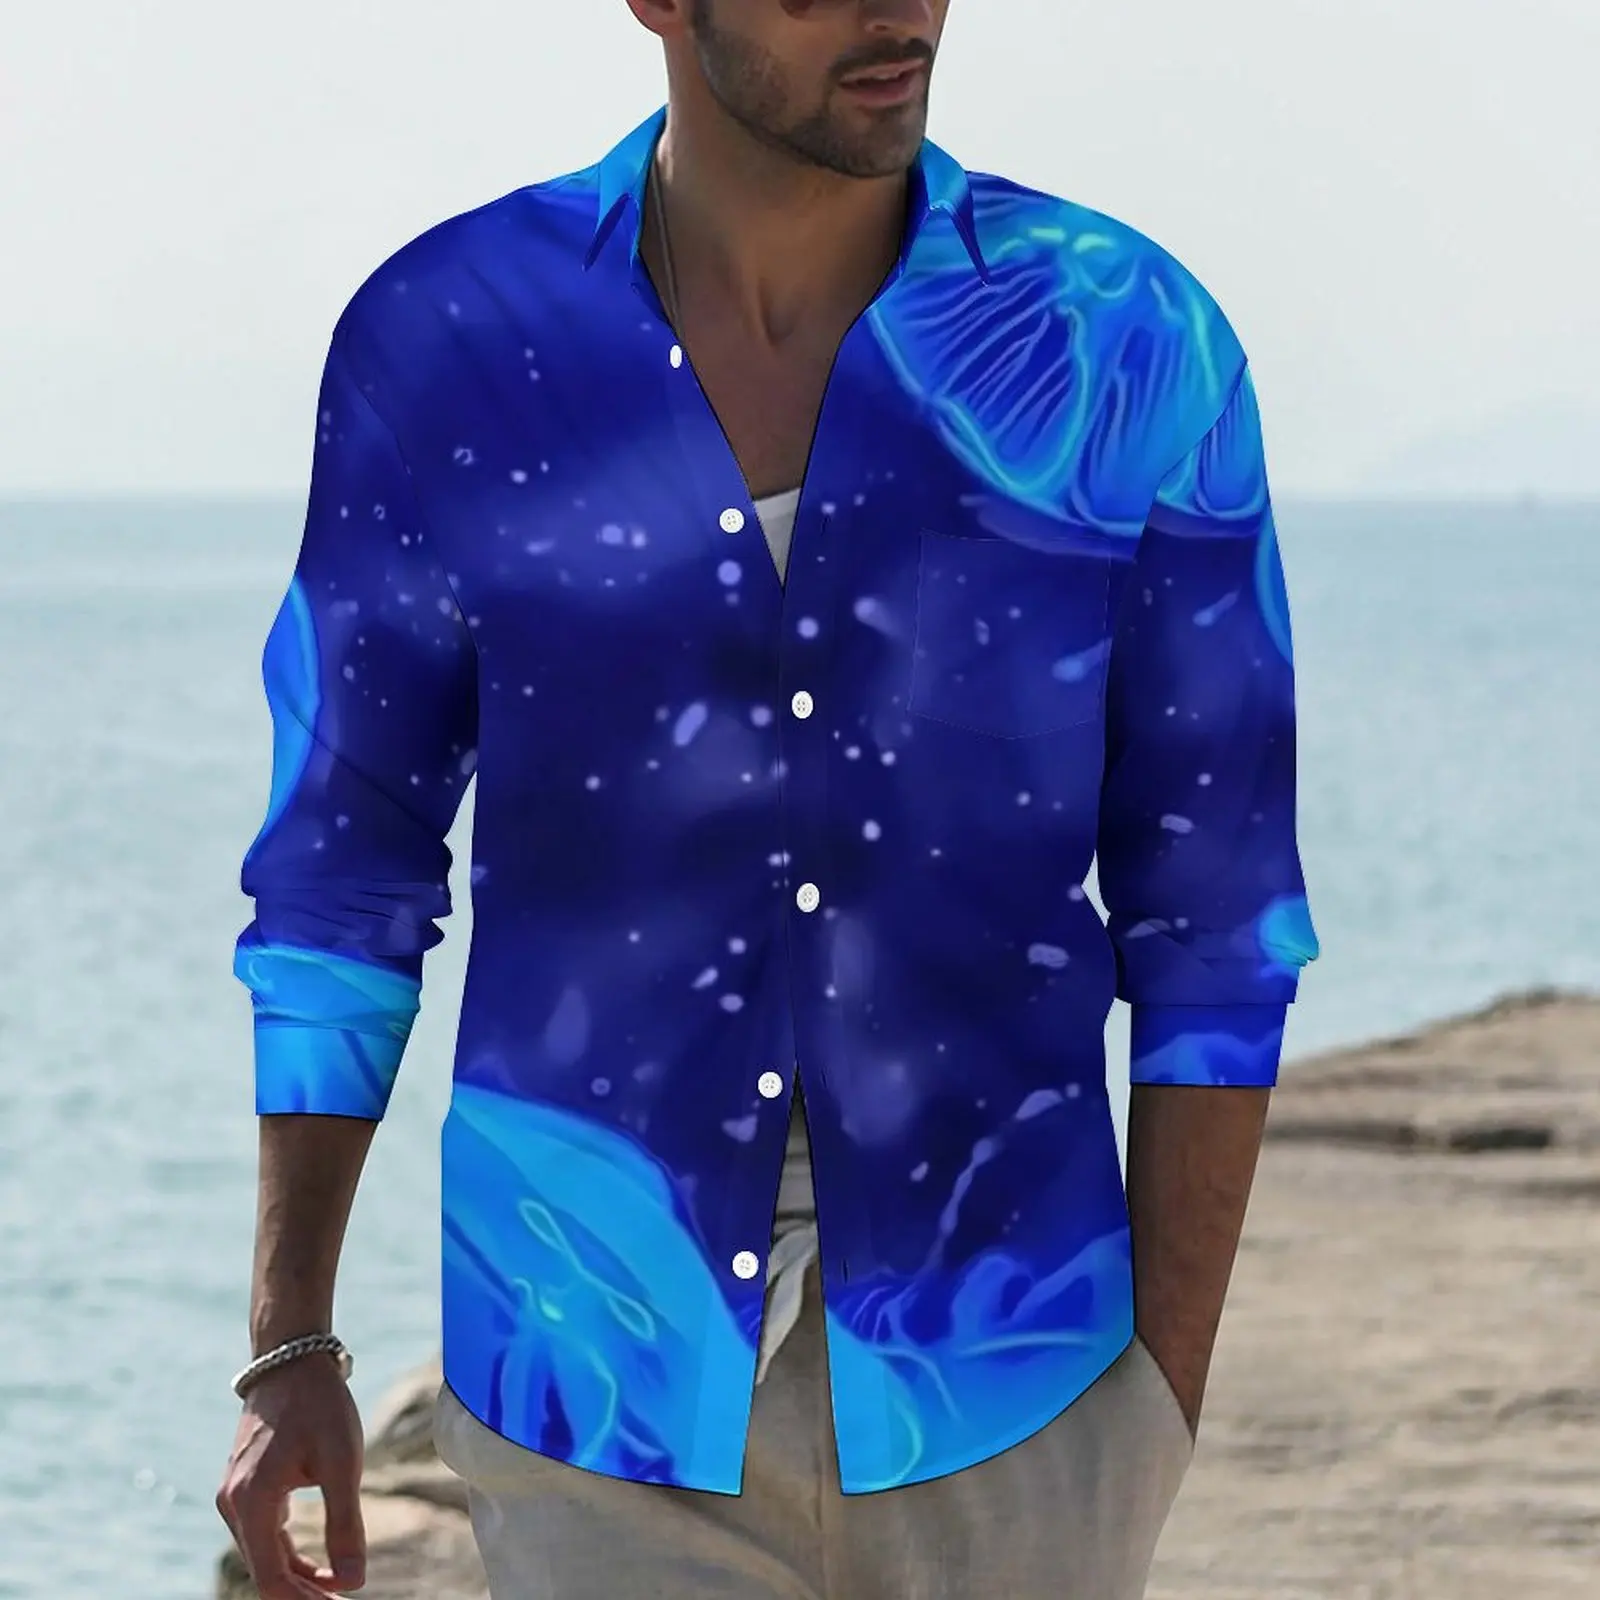 

Tropical Marine Print Shirt Male Blue Jelly Fish Casual Shirts Autumn Stylish Graphic Blouses Long Sleeve Fashion Oversized Tops